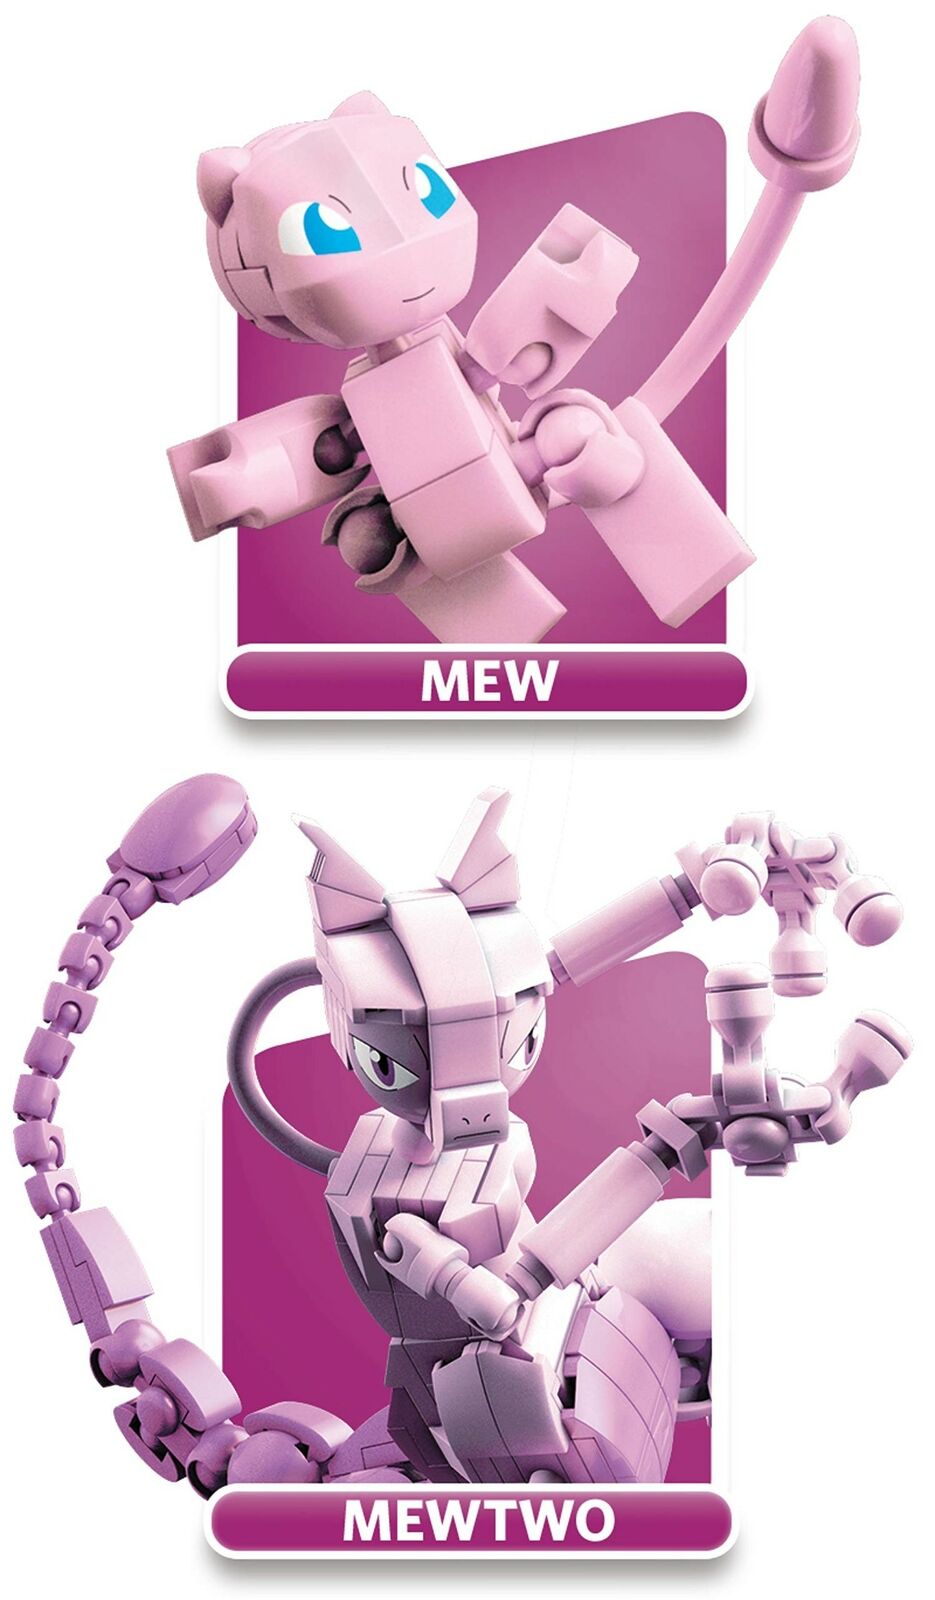  Mega Construx Pokemon Mew vs. Mewtwo Clash Construction Set  with character figures, Building Toys for Kids (341 Pieces) : Toys & Games